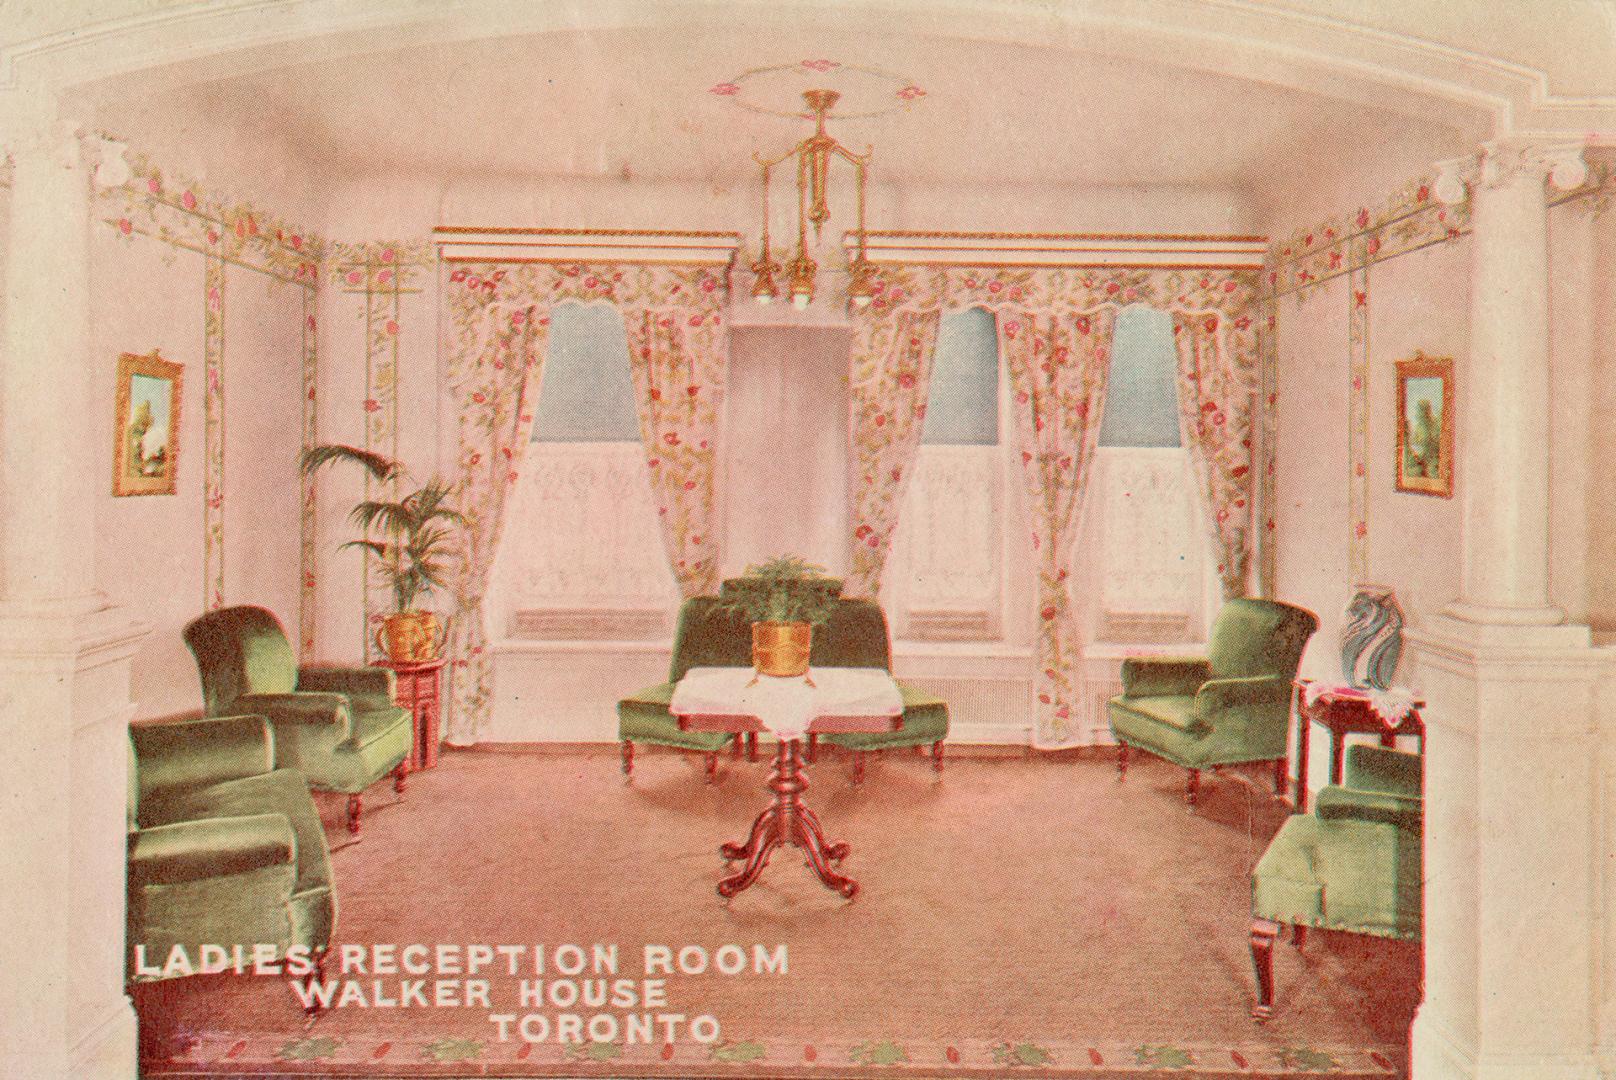 Colour postcard depicting a photo of the Ladies' Reception Room at Walker House Hotel, Toronto